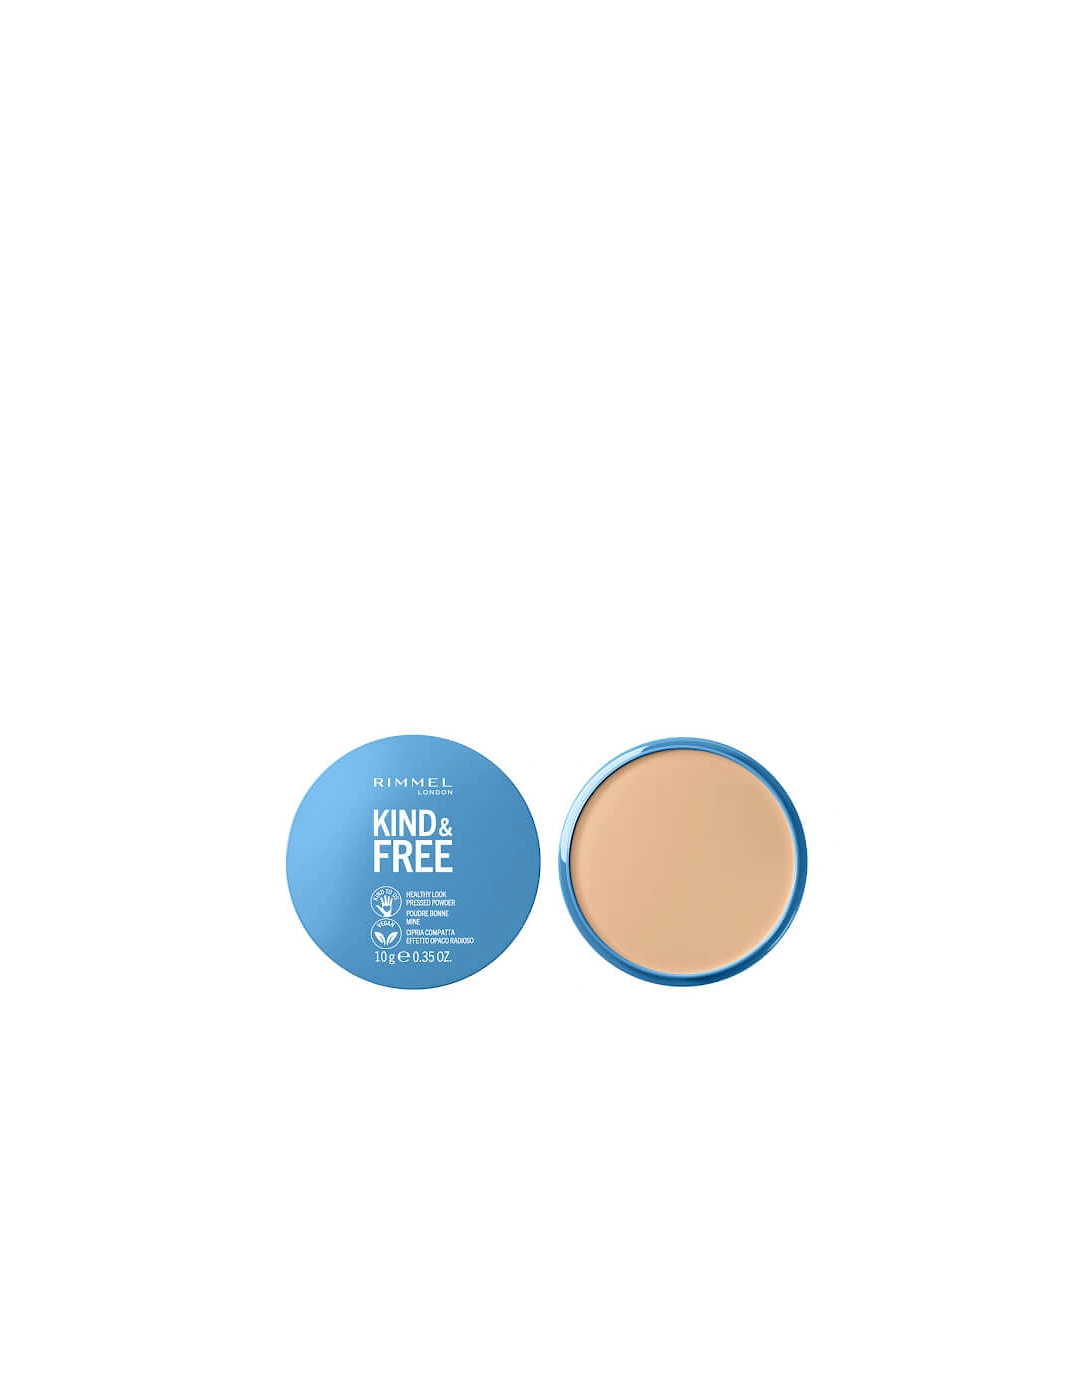 Kind and Free Pressed Powder - Fair, 2 of 1